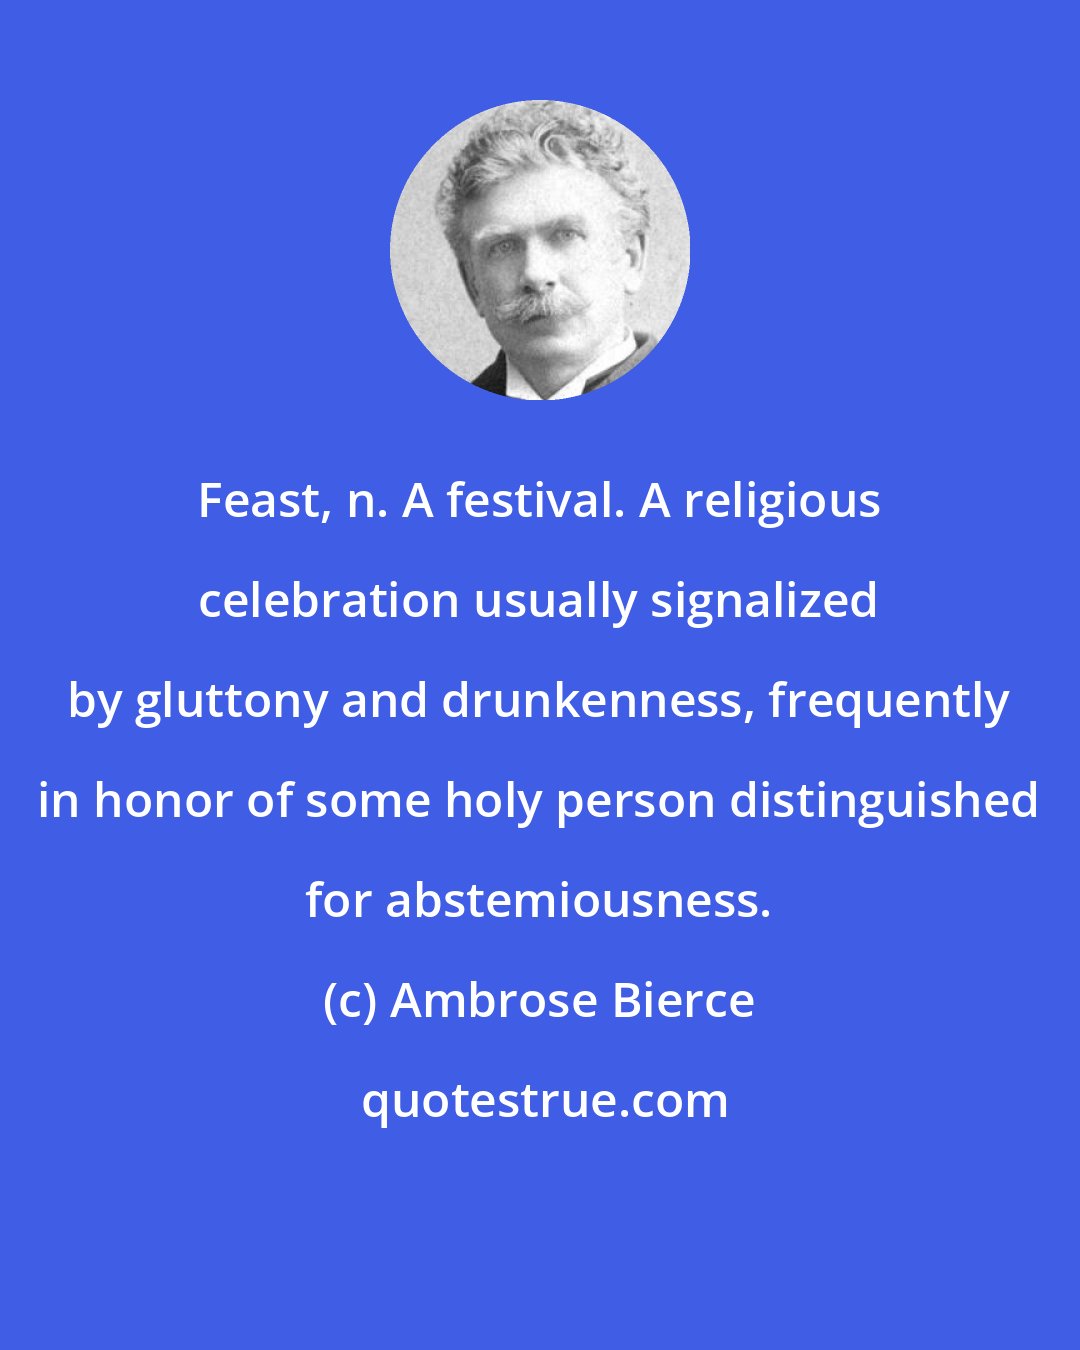 Ambrose Bierce: Feast, n. A festival. A religious celebration usually signalized by gluttony and drunkenness, frequently in honor of some holy person distinguished for abstemiousness.